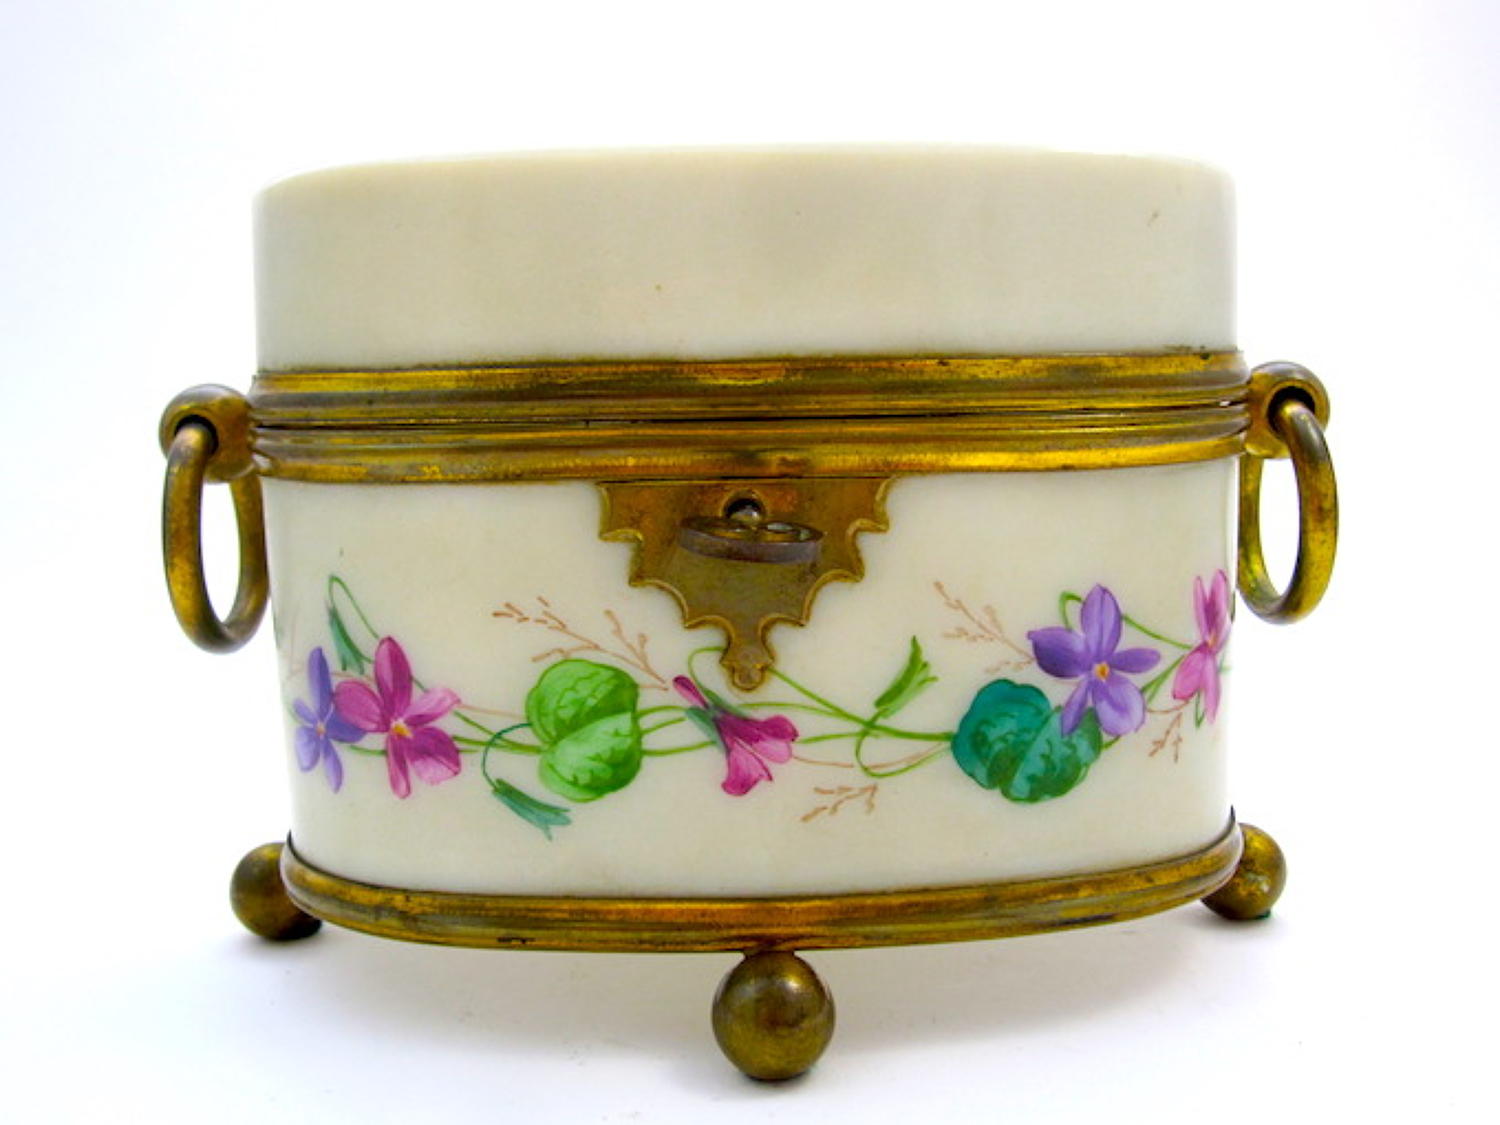 Antique French Opaline Casket Box with Hand Painted Flowers